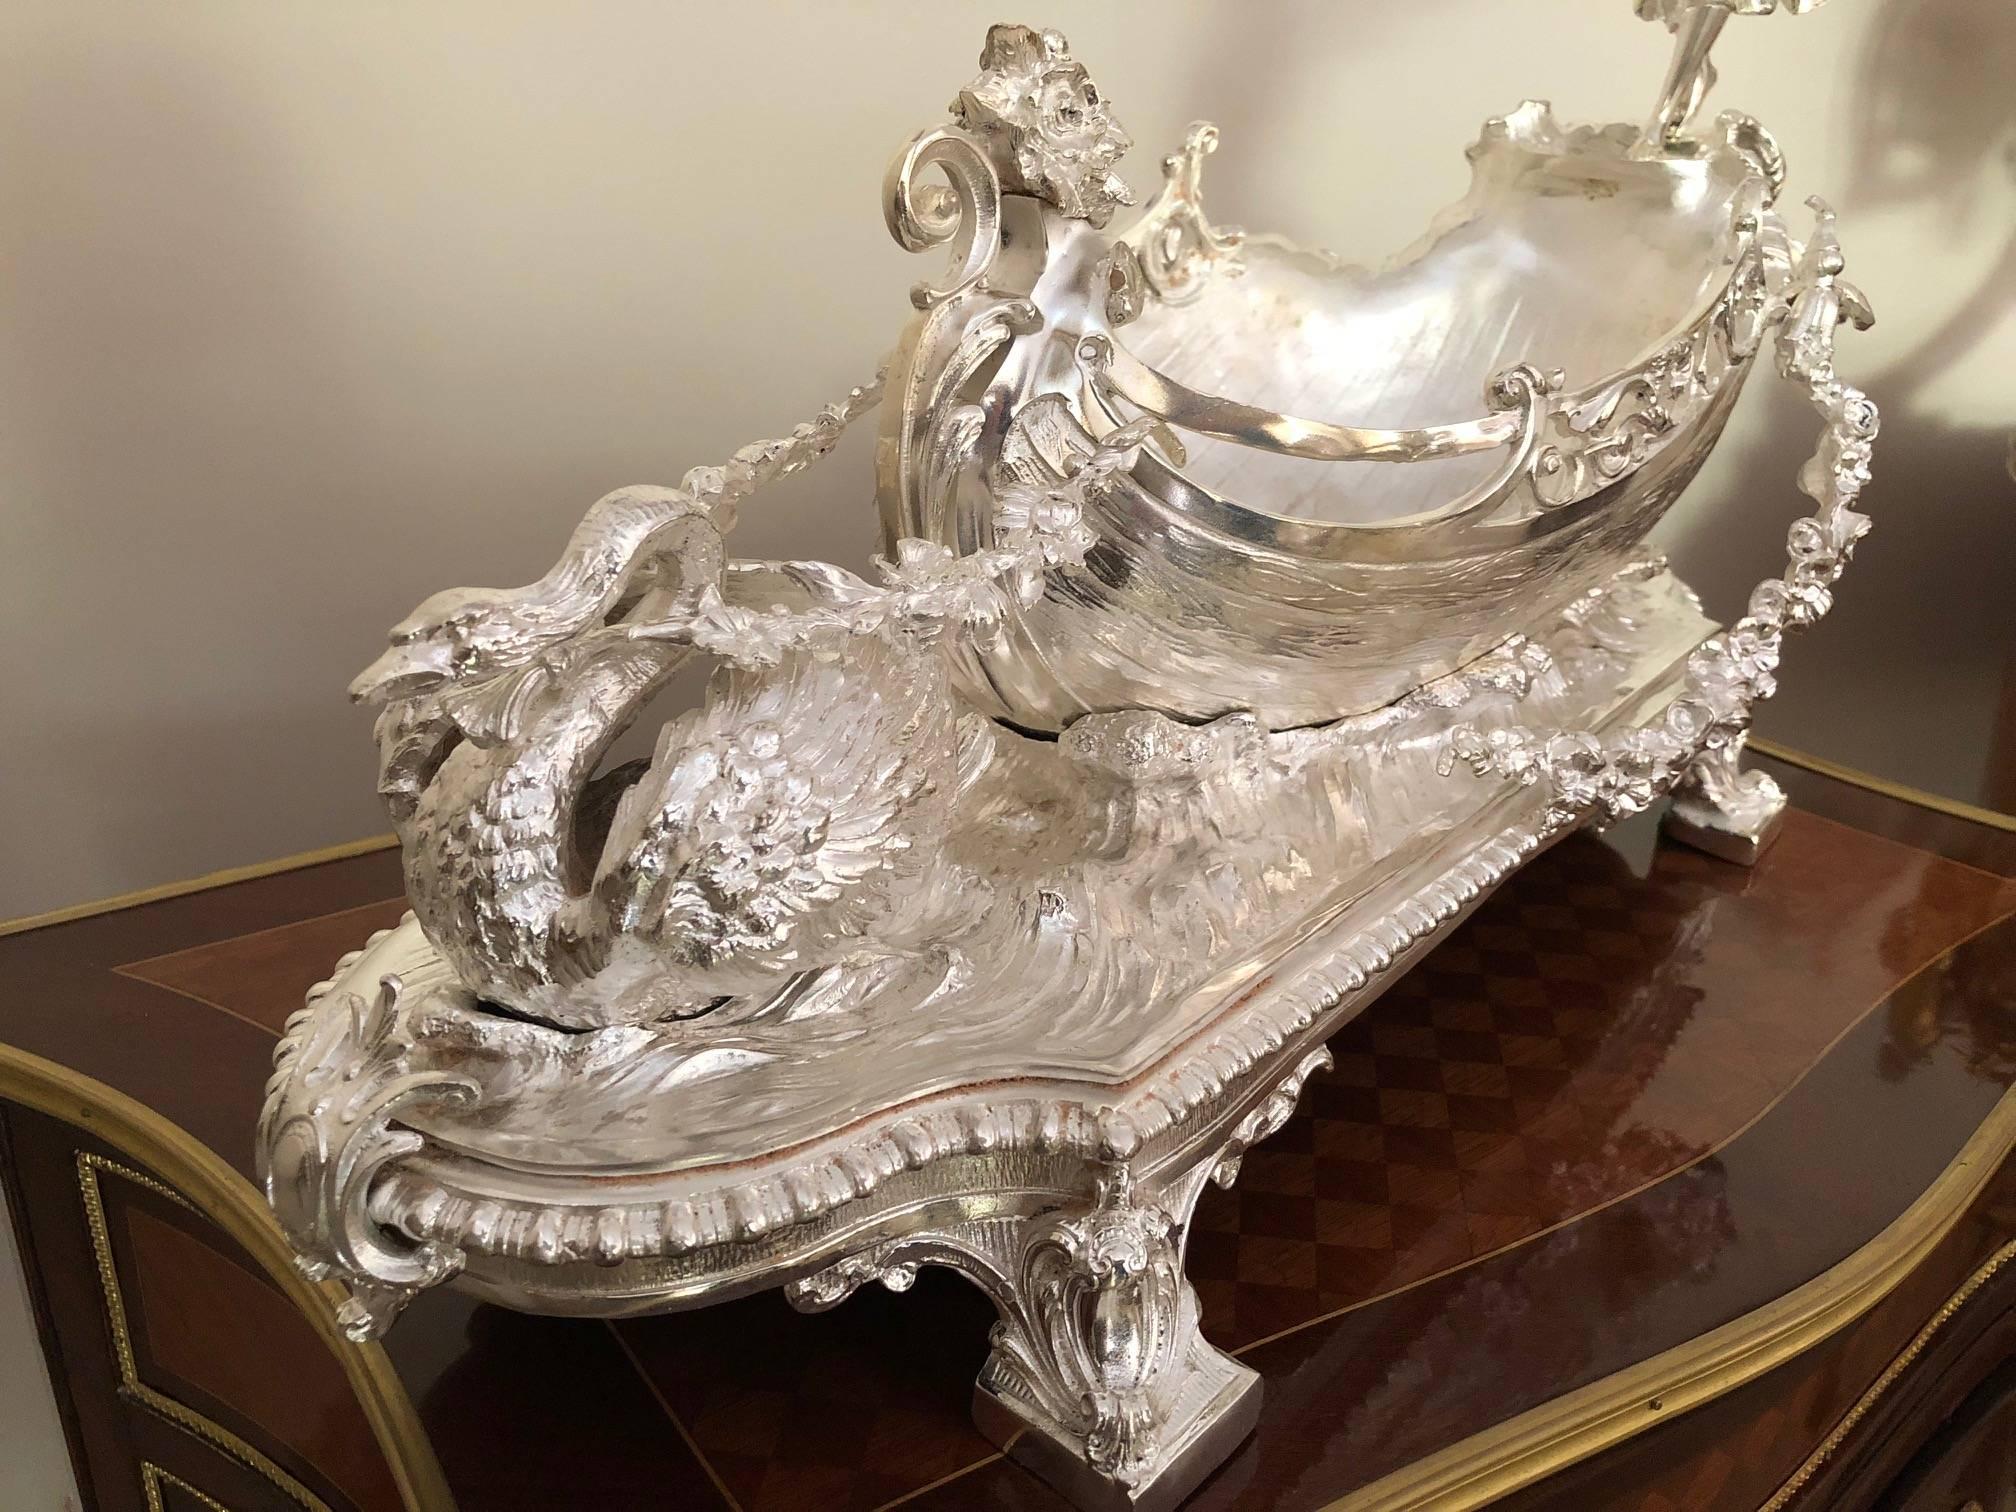 Extremely splendid jardinière in excellent quality. Ornate ornaments. Finely chased and patented. An absolute highlight. Solid bronze silver plated.